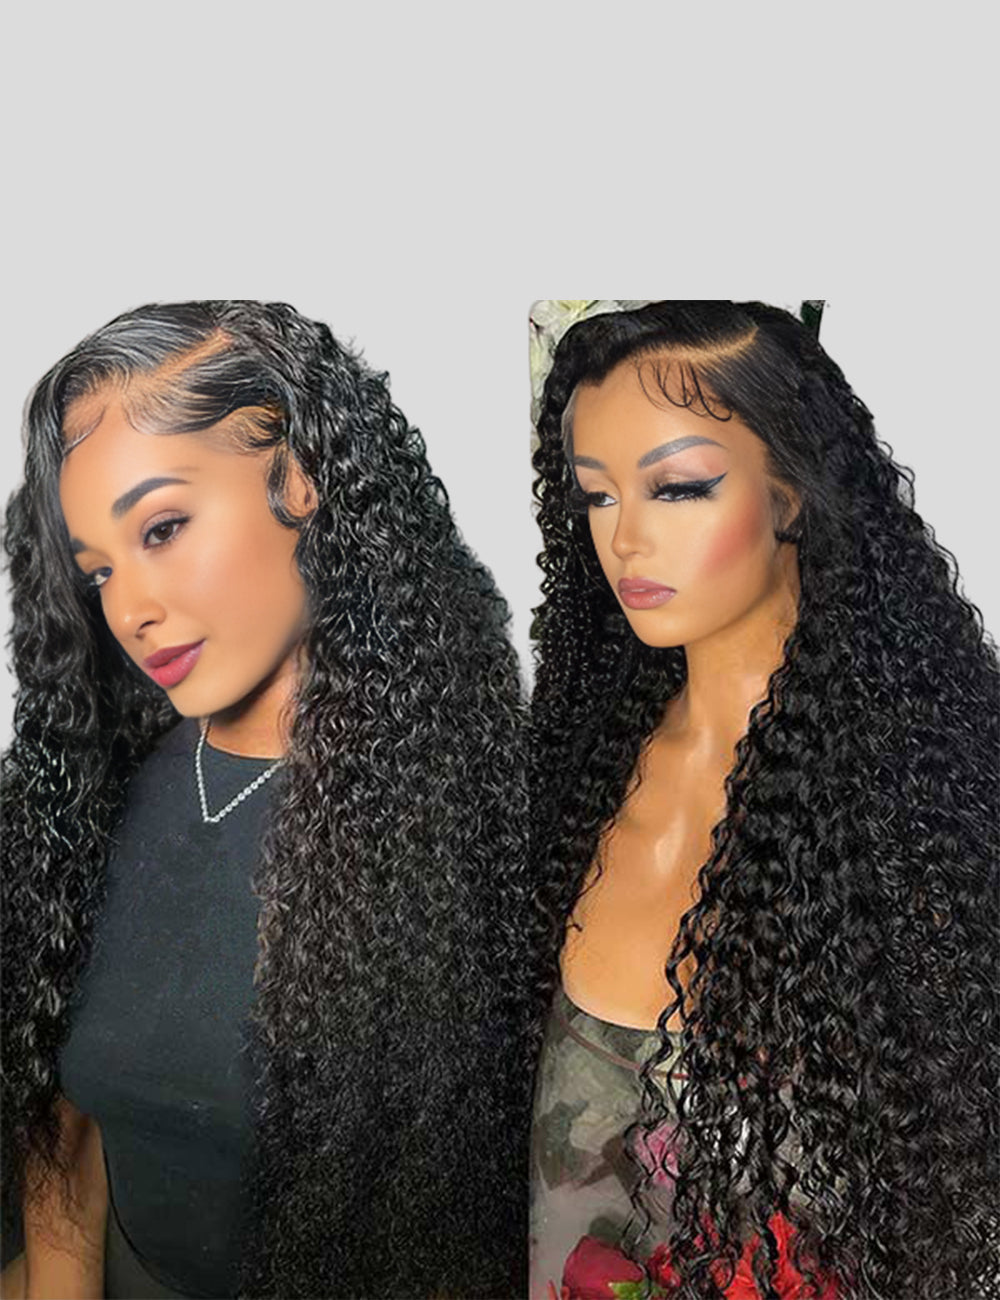 Curly Human Hair Wigs Curly Lace Front Wigs Undetectable Lace Wigs 13x4 Lace Frontal Wigs